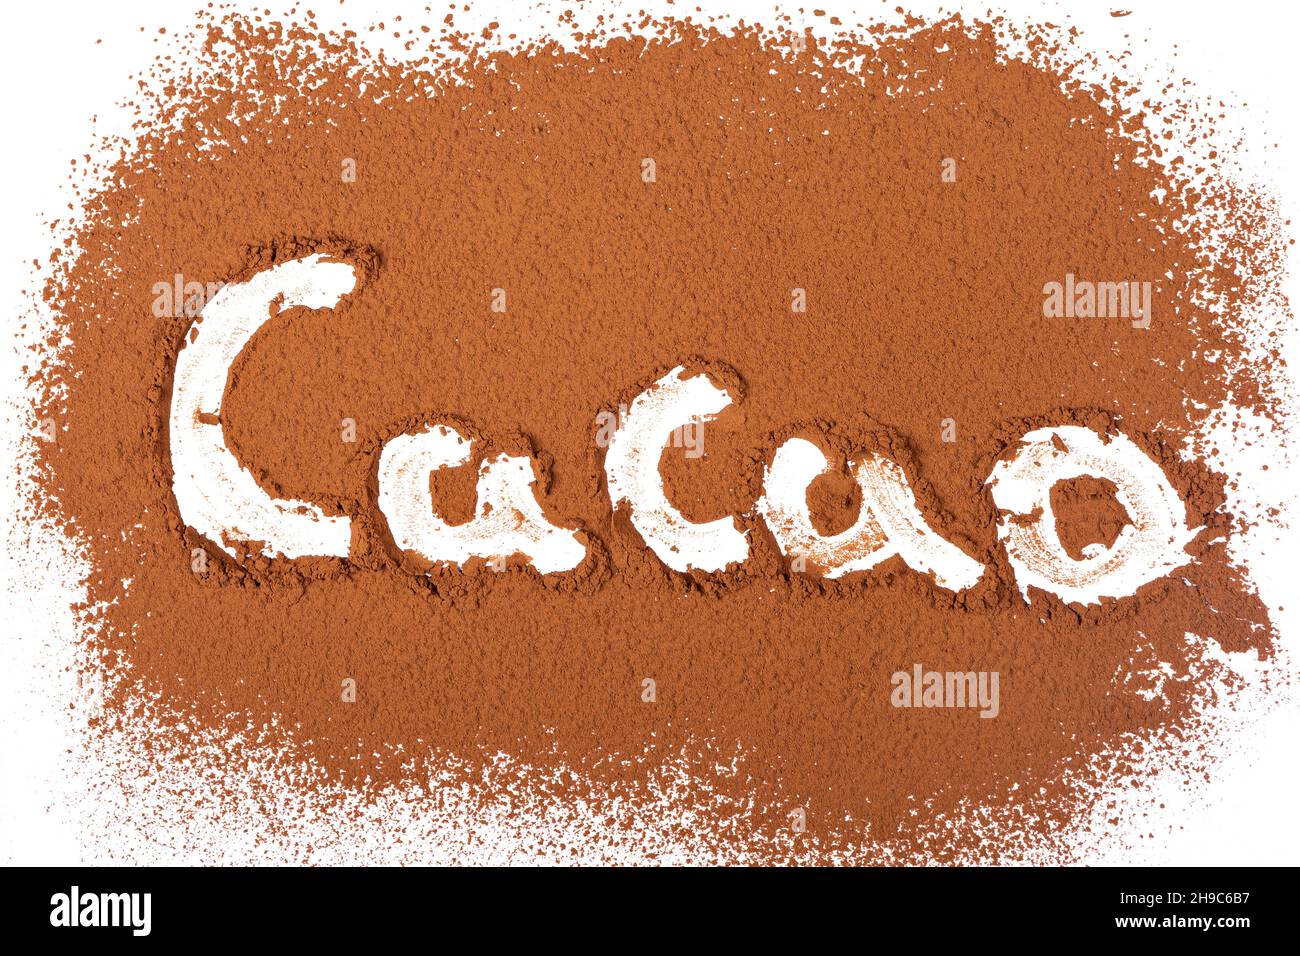 Studio photo with white background of handmade engraved letters on cocoa powder surface Stock Photo